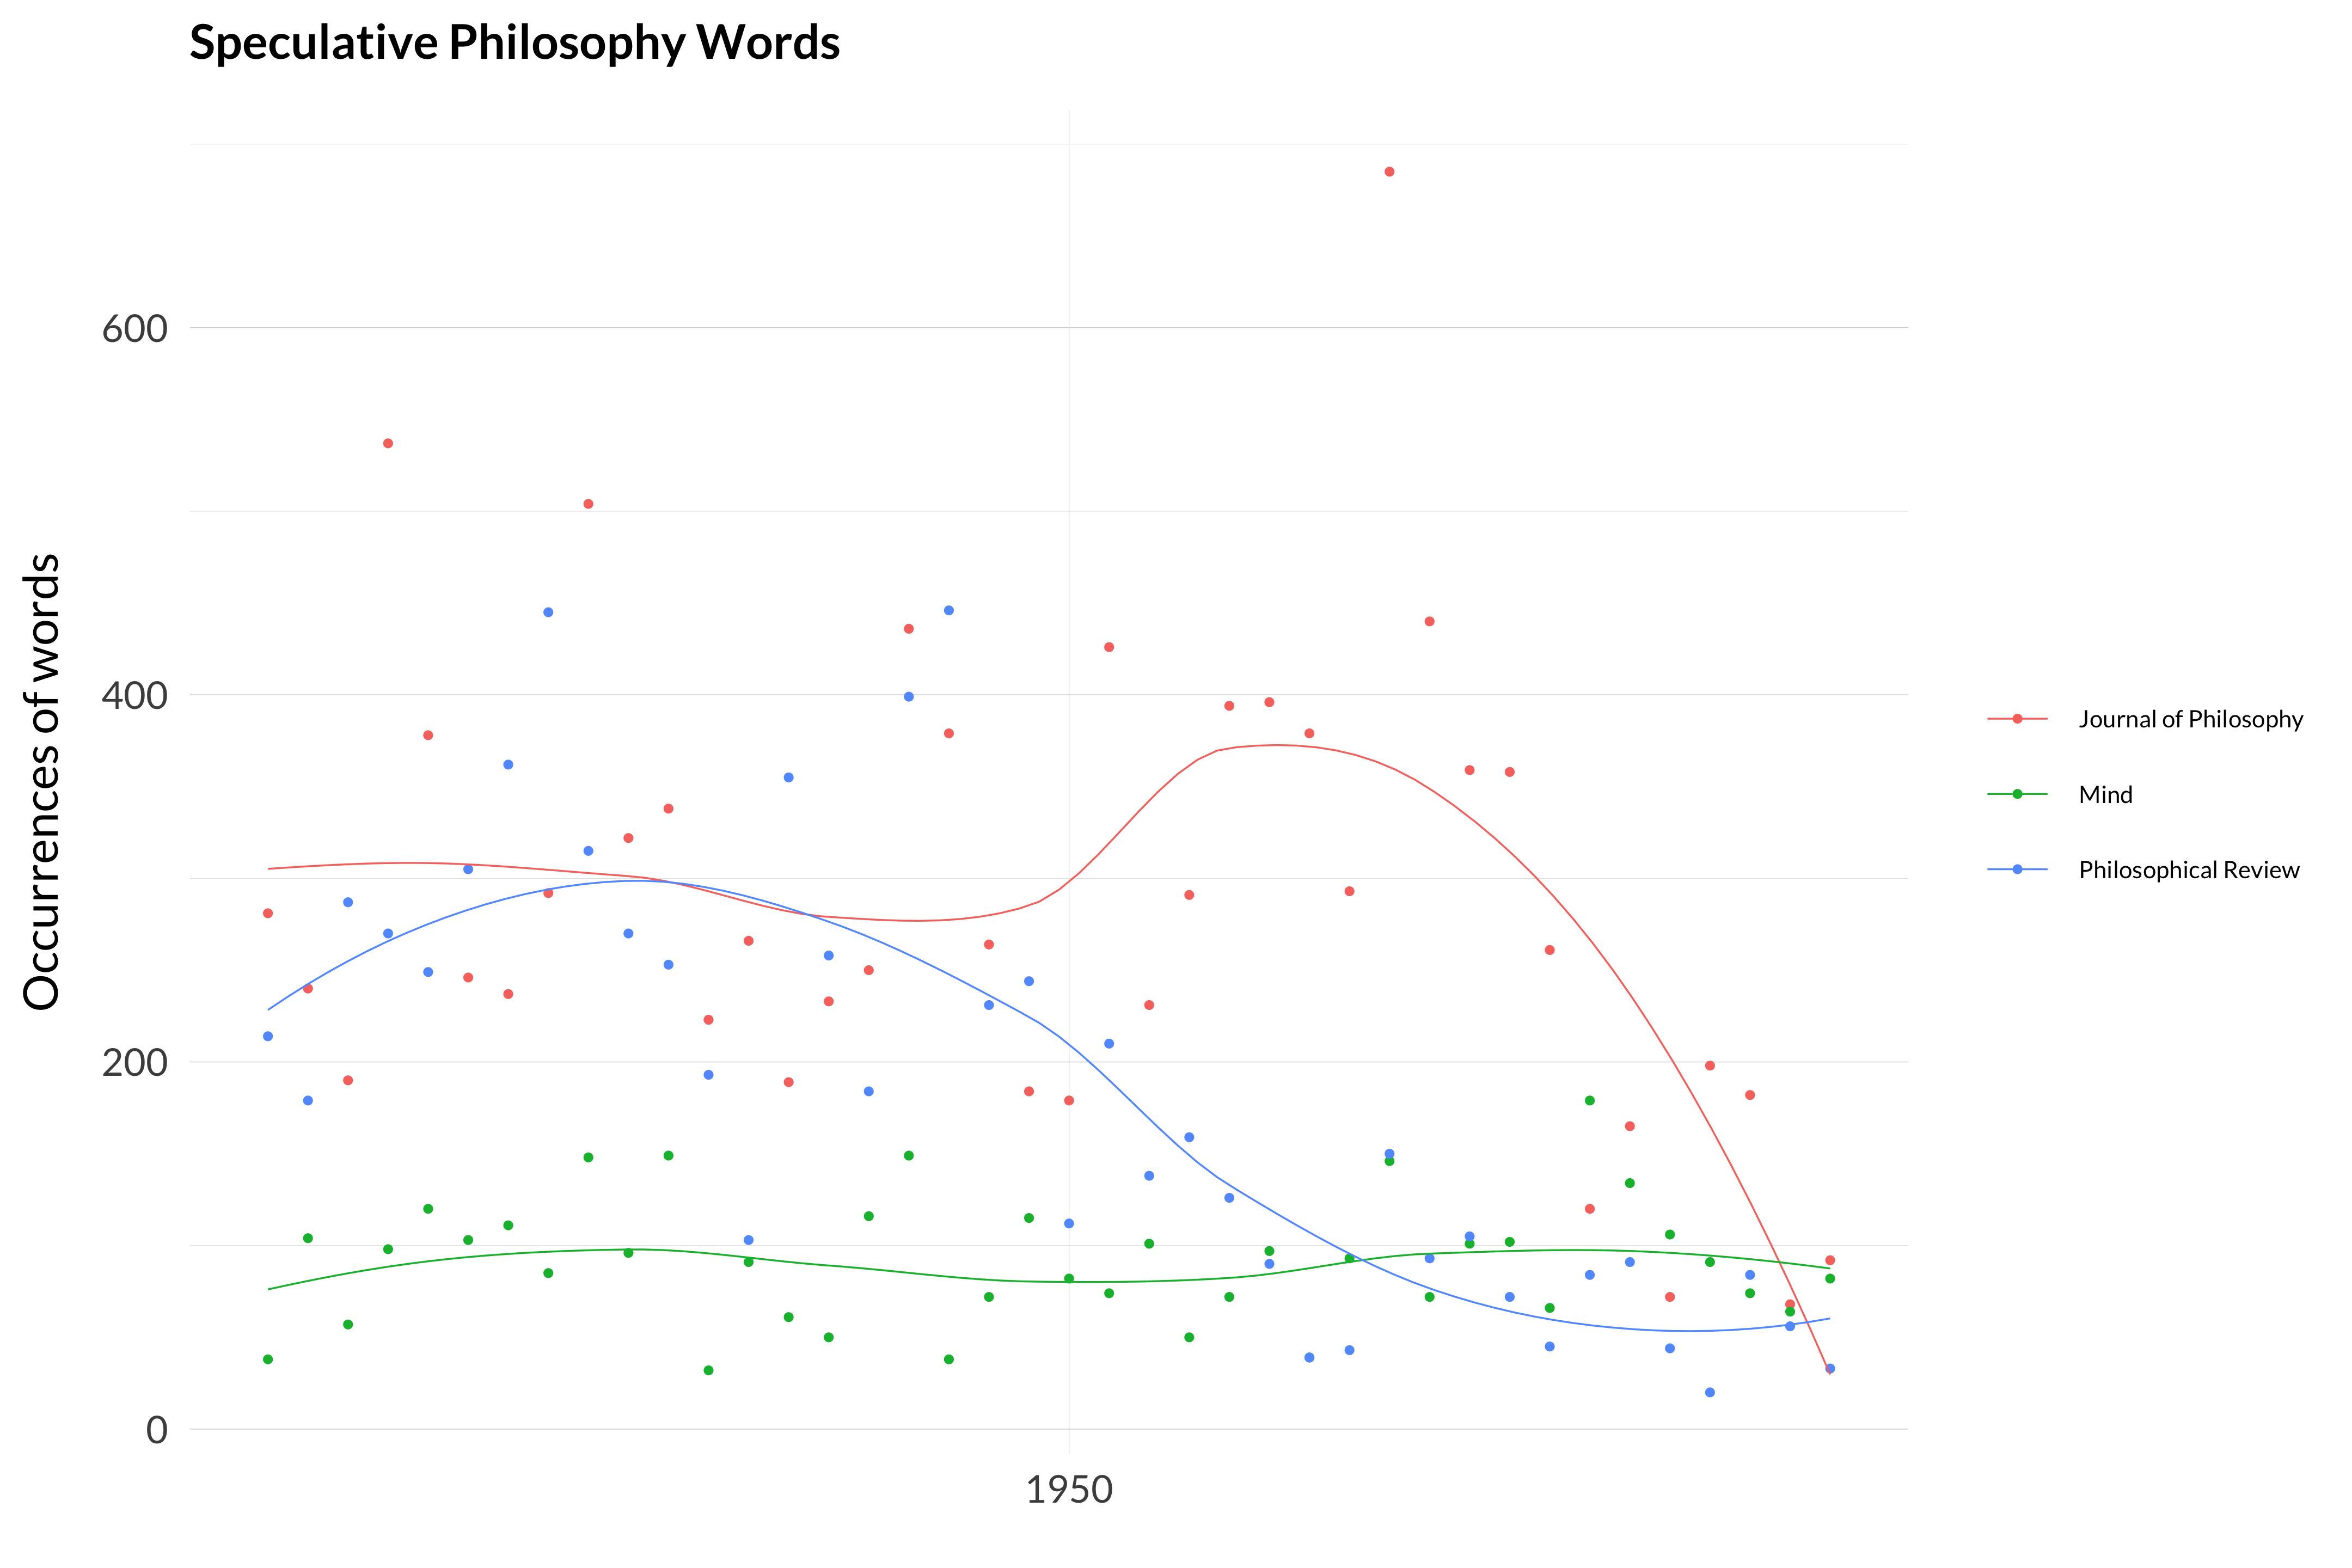 A single scatterplot showing the sums of the values in the nine scatterplots in the previous graph. These words do not get used very often in _Mind_. In Philosophical Review, they are used roughly three times as often until 1950, when they slowly decline back to Mind's level. The same is true through 1950 for Journal of Philosophy, but theyn they actually increase in frequency through the 1950s, before declining rapidly in the 1960s.